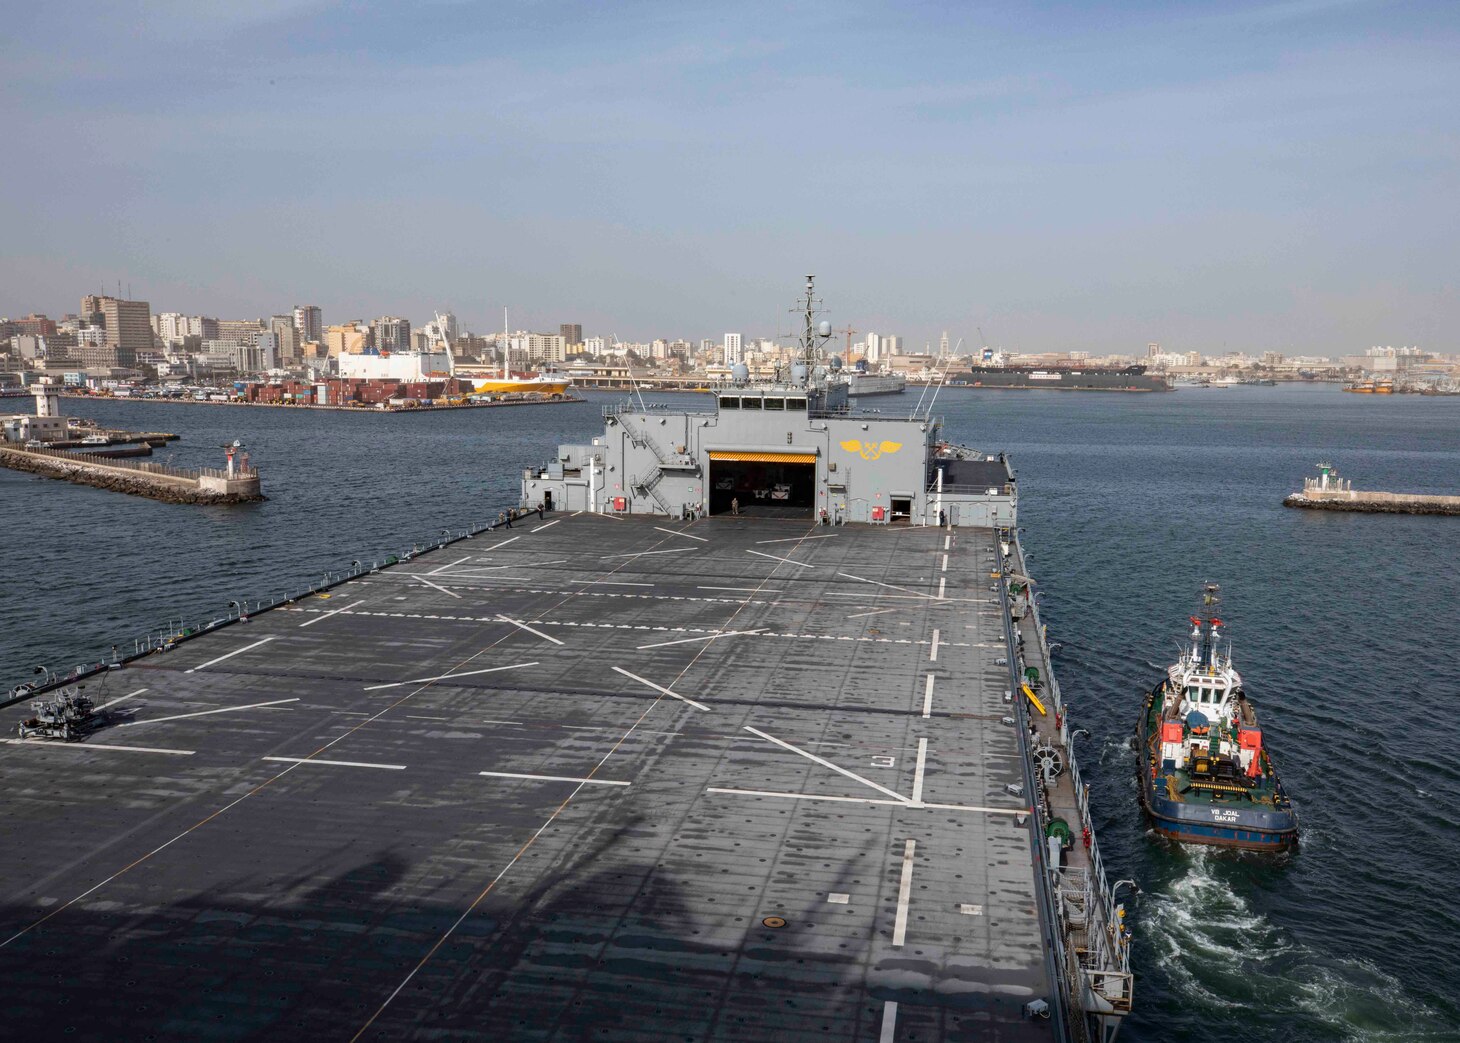 The Expeditionary Sea Base USS Hershel "Woody" Williams (ESB 4), enters the port of Dakar, Senegal, to participate in the multinational exercise Obangame Express, March 10, 2022.